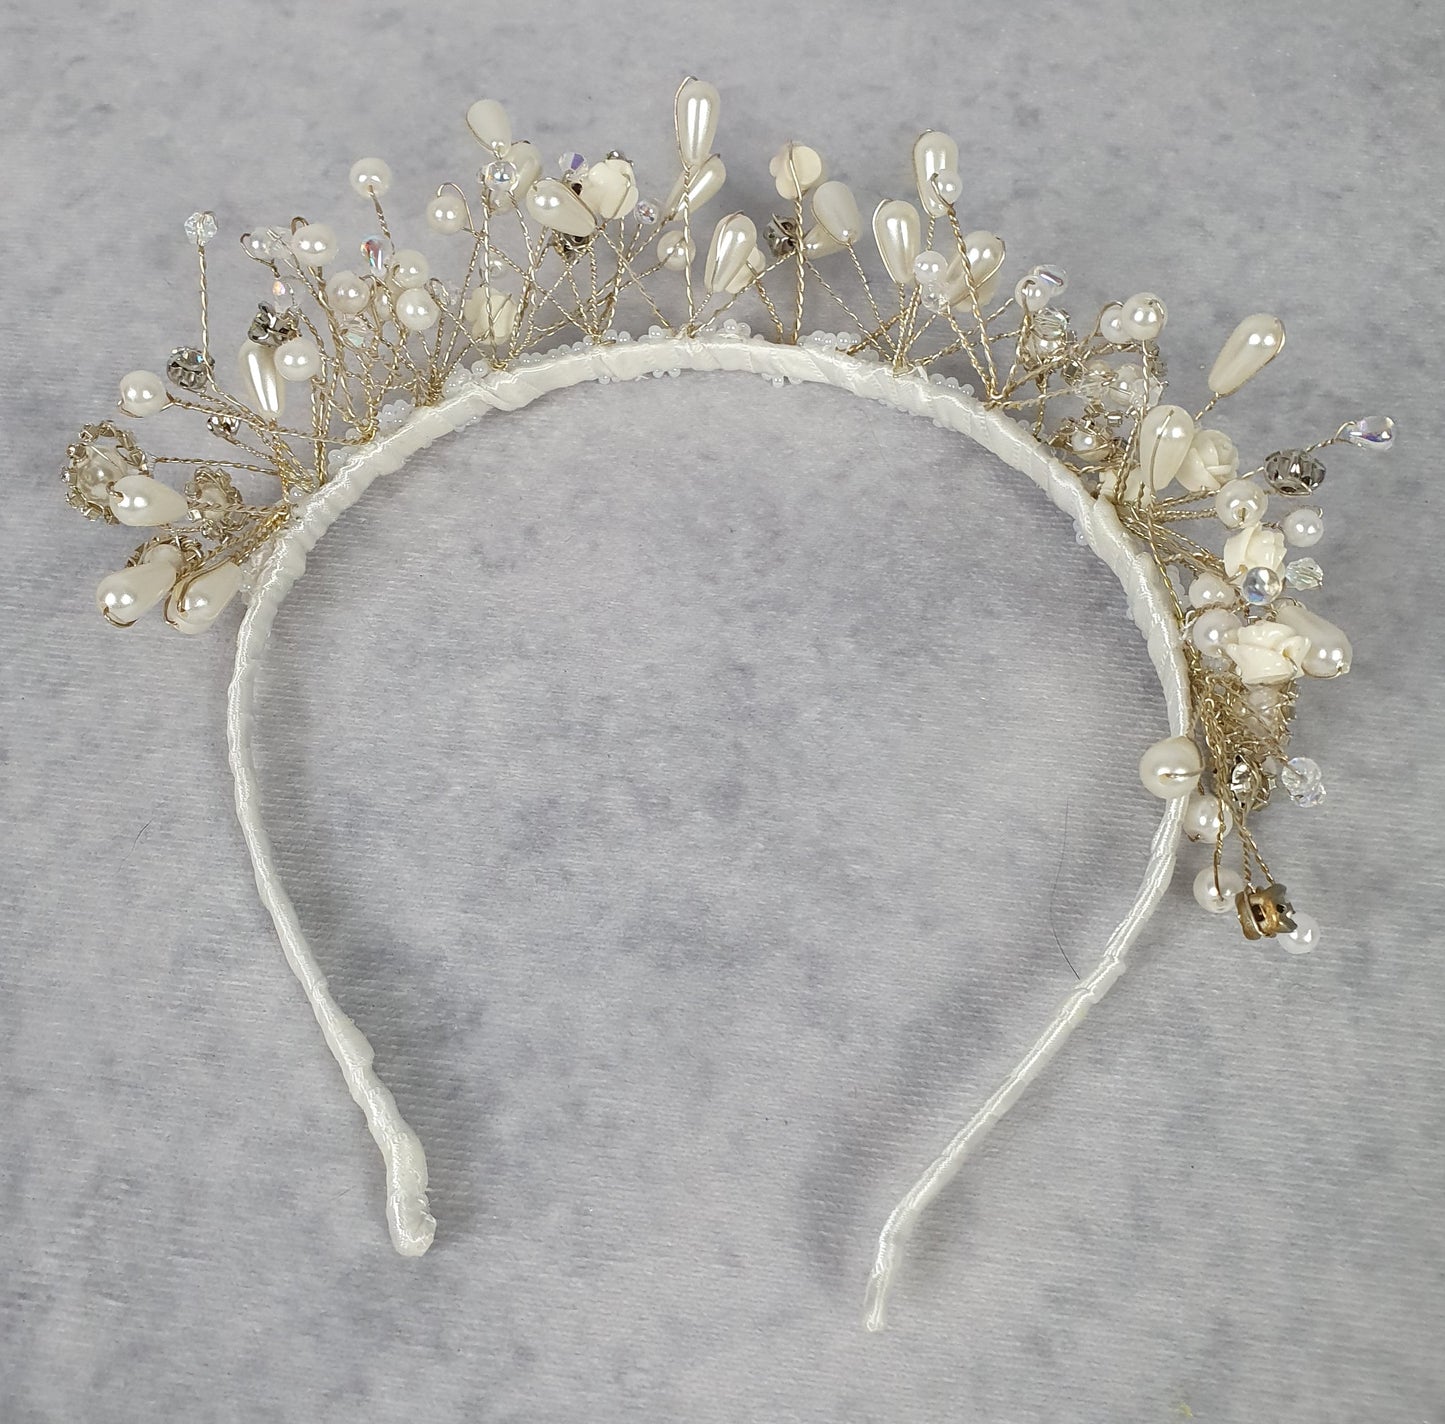 Handmade headband with roses and pearls crystal stones - Beautiful headband, unique festive diadem, wedding, special occasion